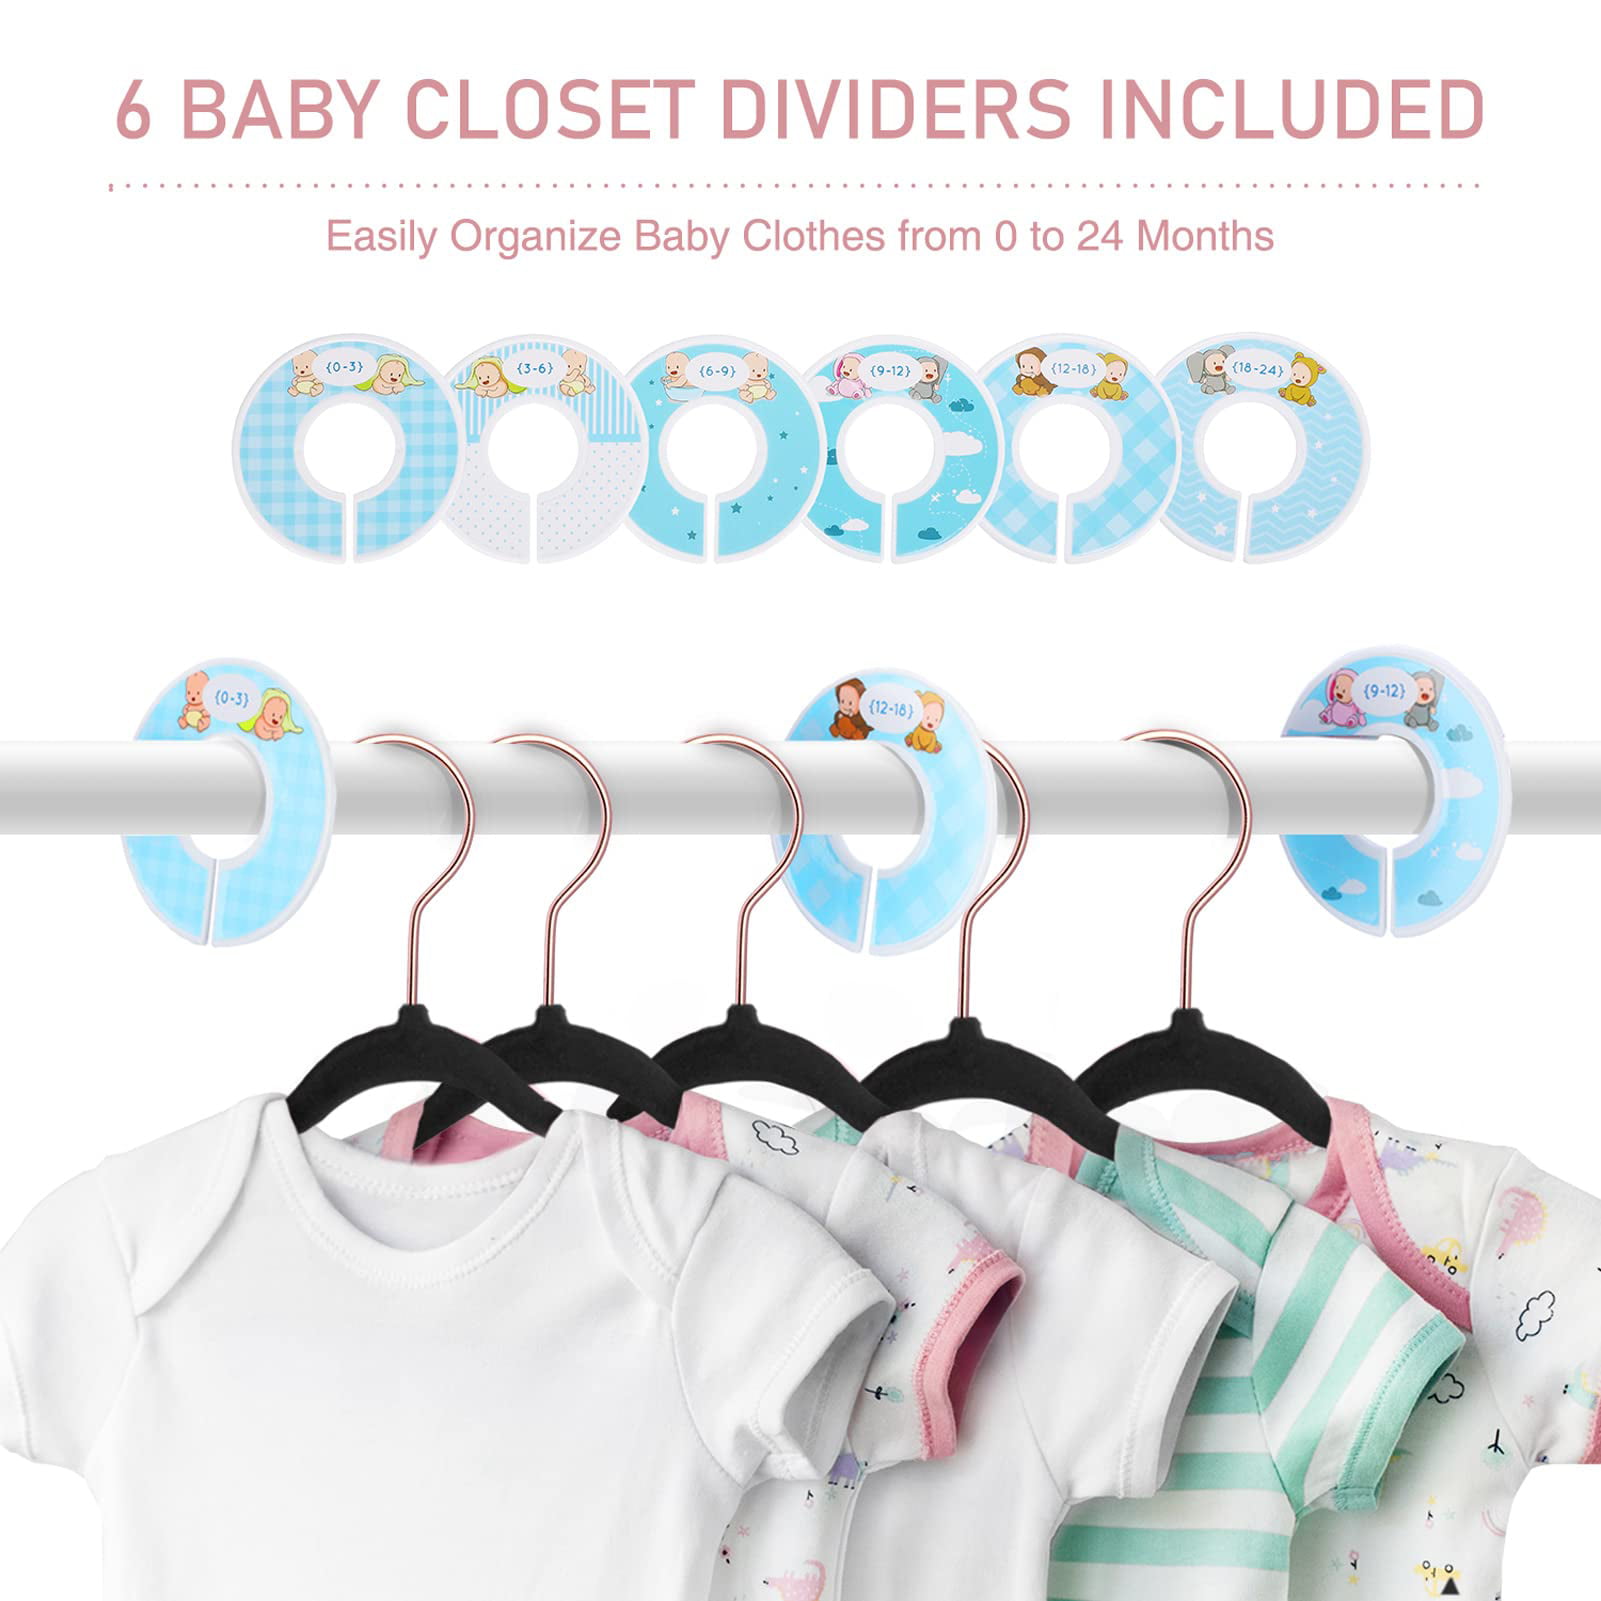 Acstep Kids Hangers for Closet 50 Pack, 11.4 inch Baby Clothes Velvet Toddler Hangers with 6 Pcs Closet Dividers - White